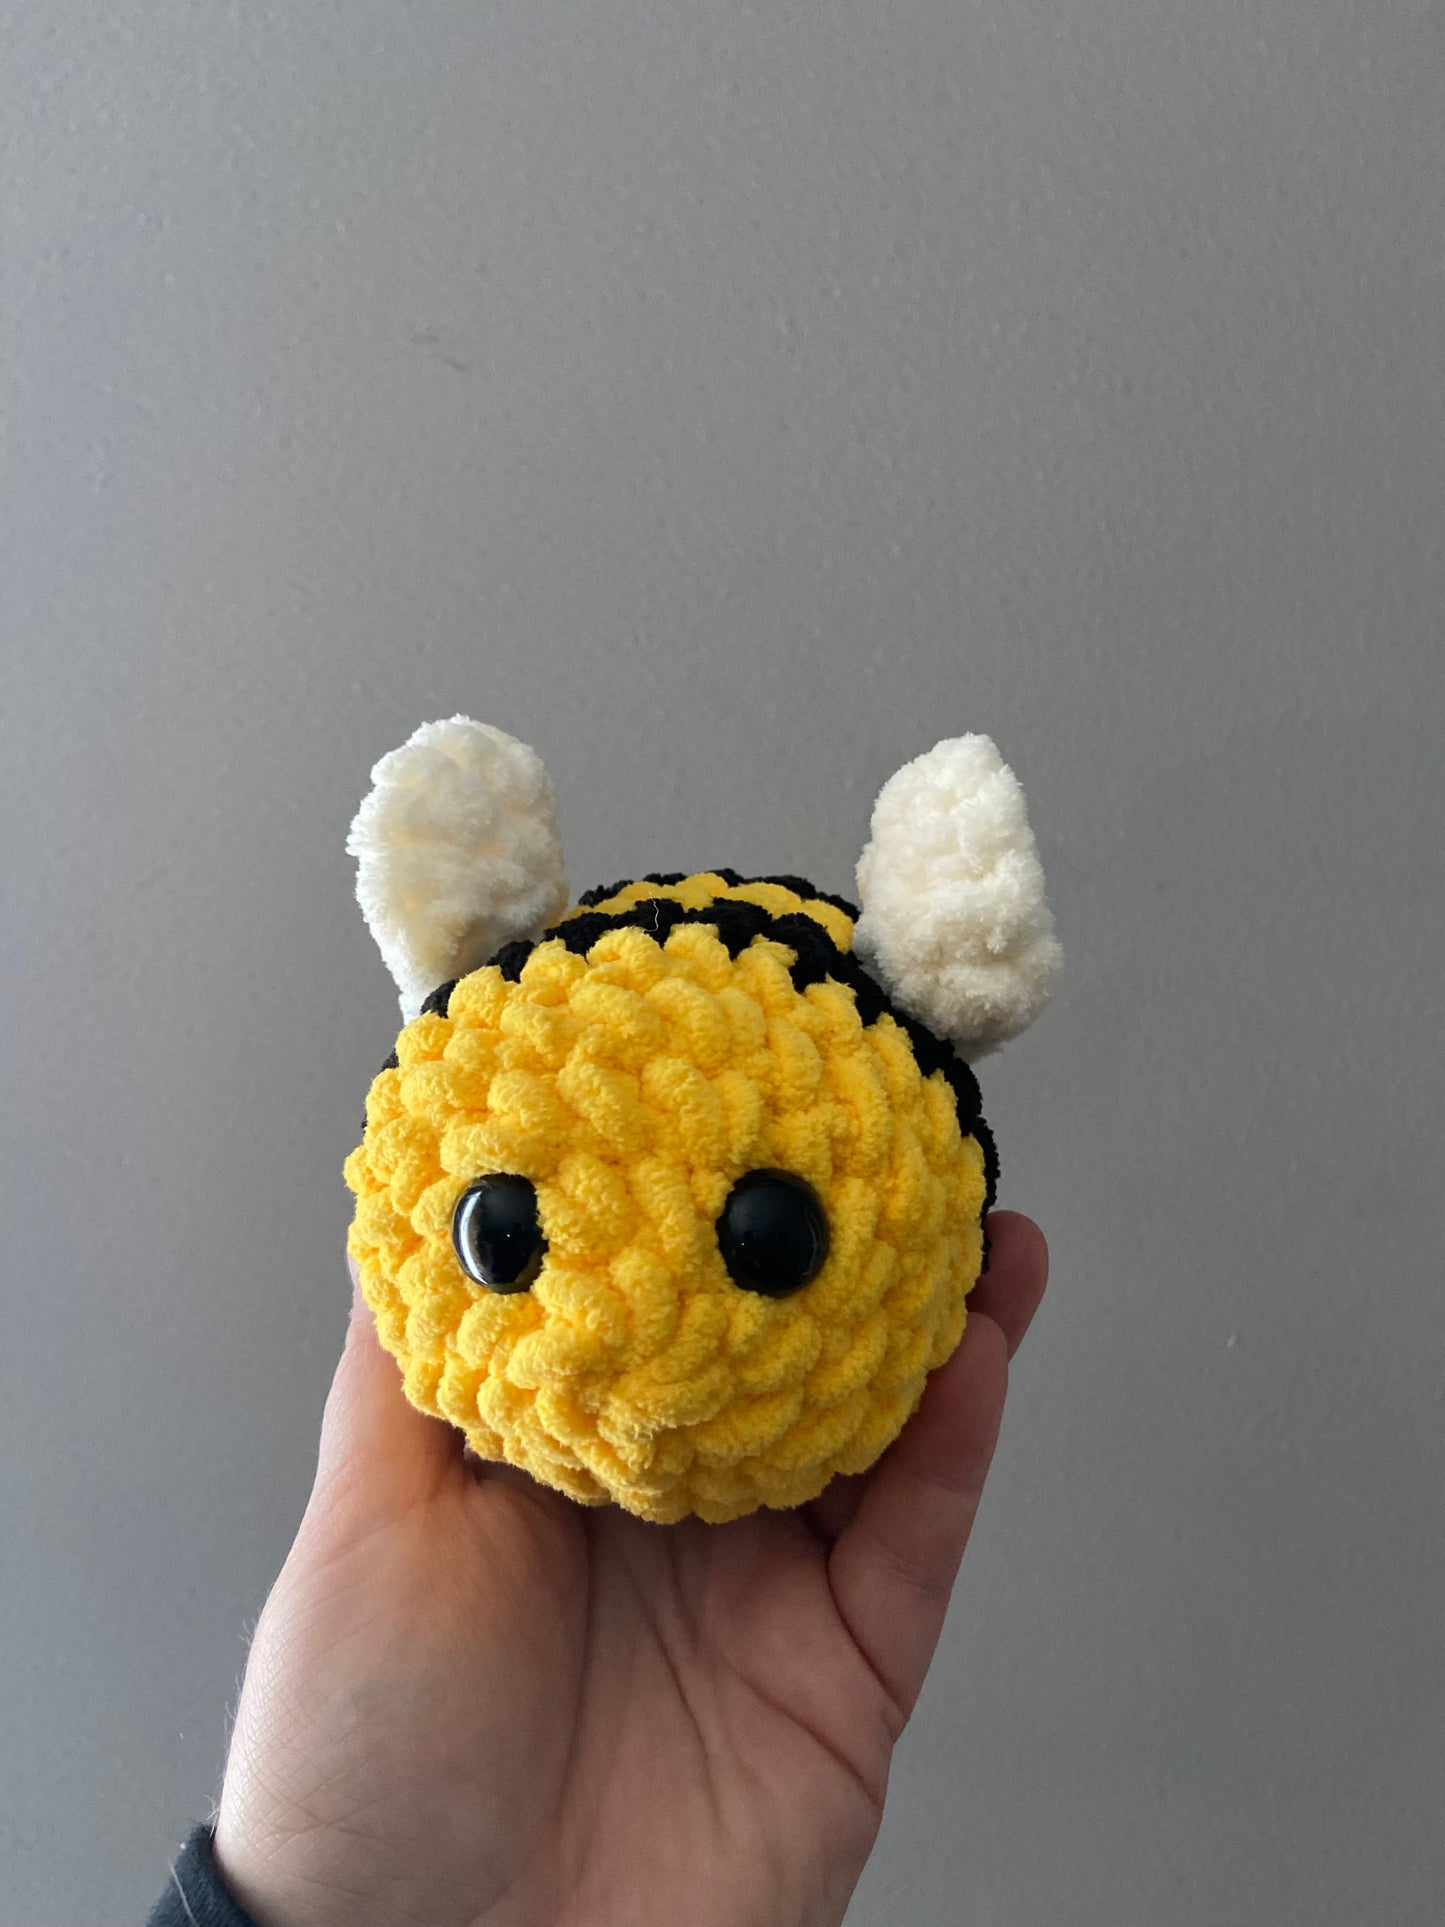 Crochet bee with yellow and black stripes, fuzzy wings, and a smiling face.